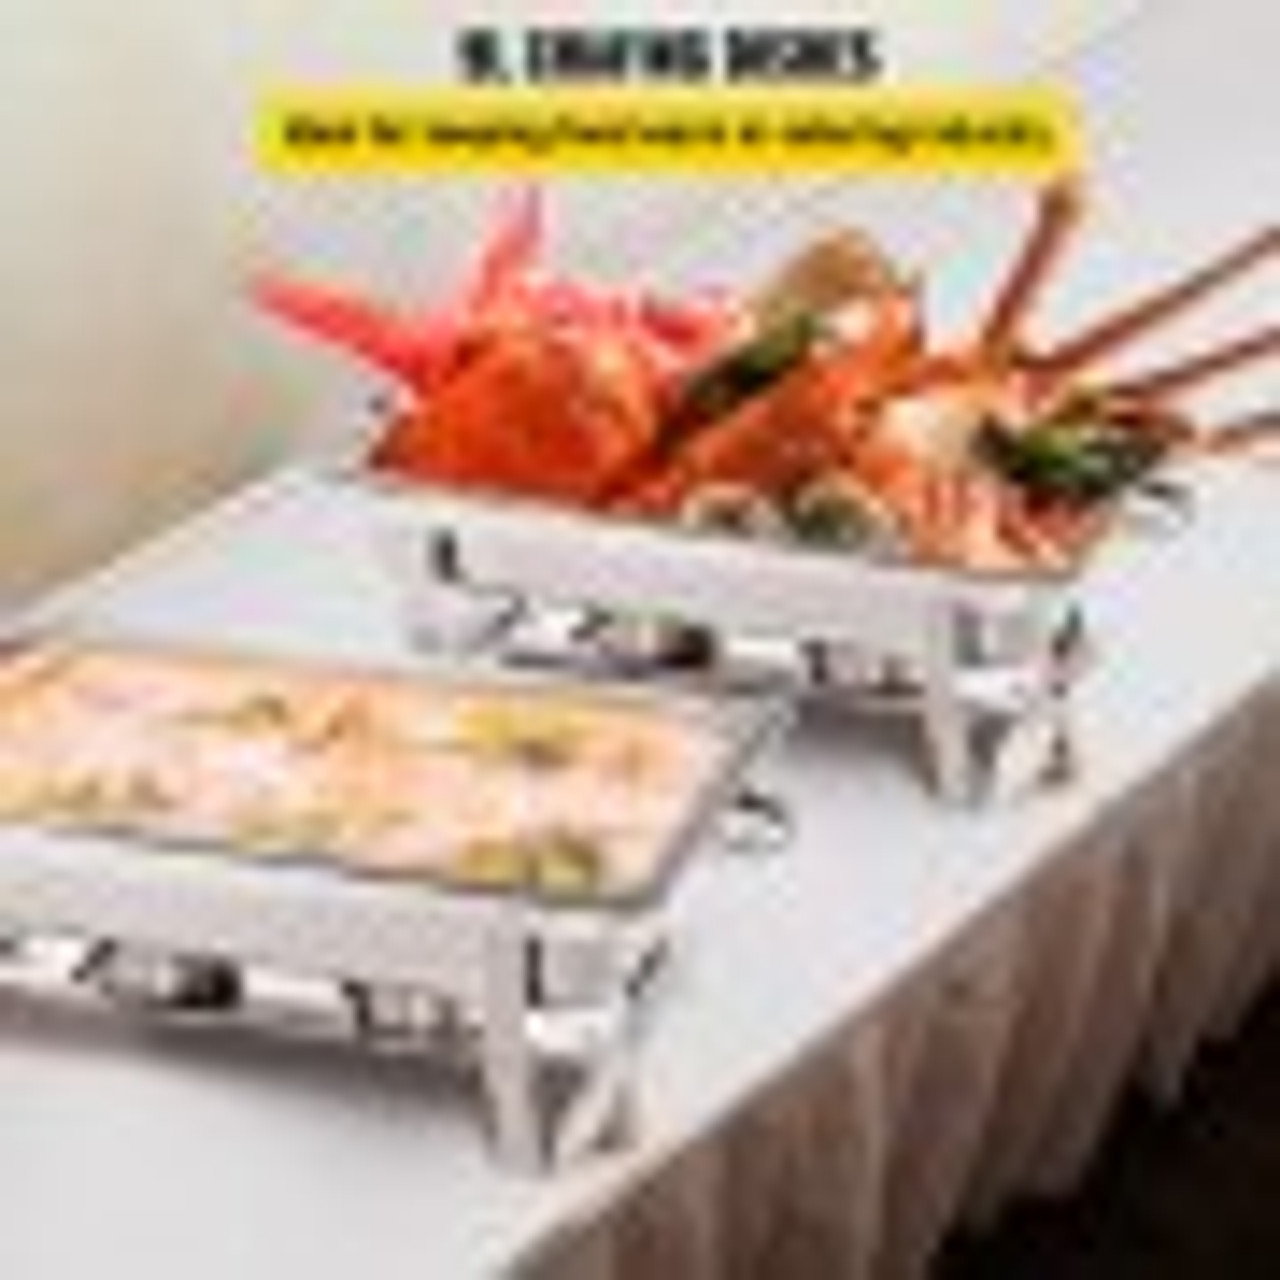 Chafing Dish 2 Packs, 9 Quart Stainless Steel Chafer Complete Set, Rectangular Chafers for Catering Buffet Warmer Set with Folding Frame